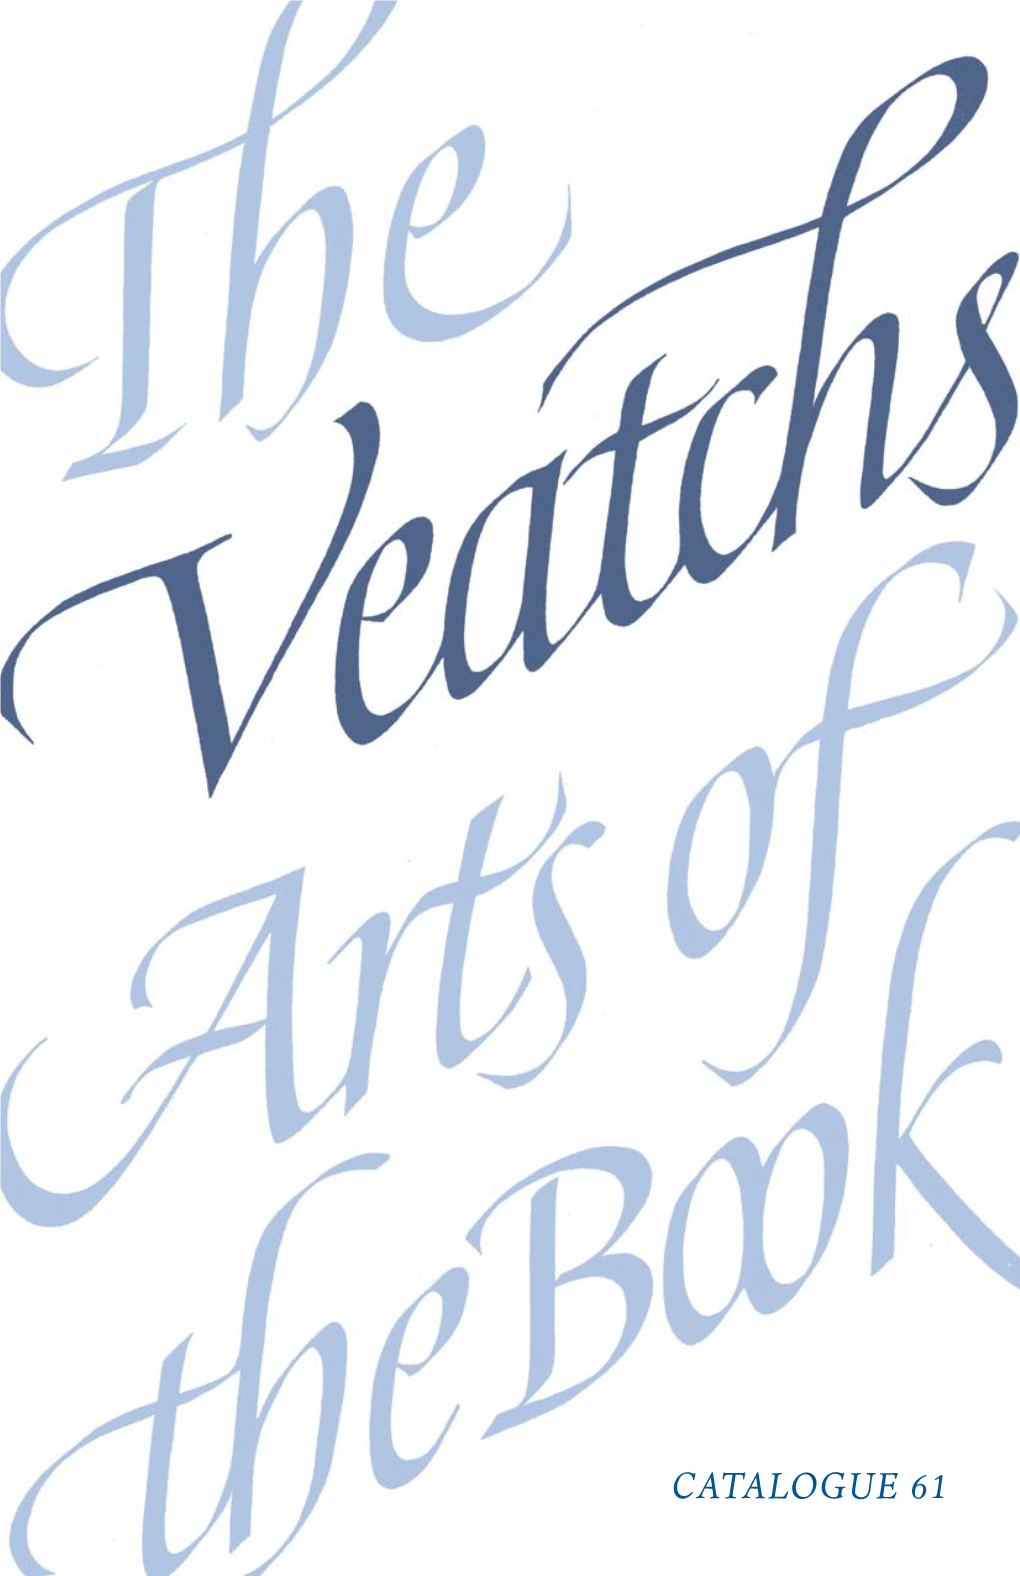 CATALOGUE 61 the VEATCHS ARTS of the BOOK Post Oyce Box 328, Northampton, Massachusetts 01061 Phone 413-584-1867 Fax: 413-584-2751 Veatchs@Veatchs.Com